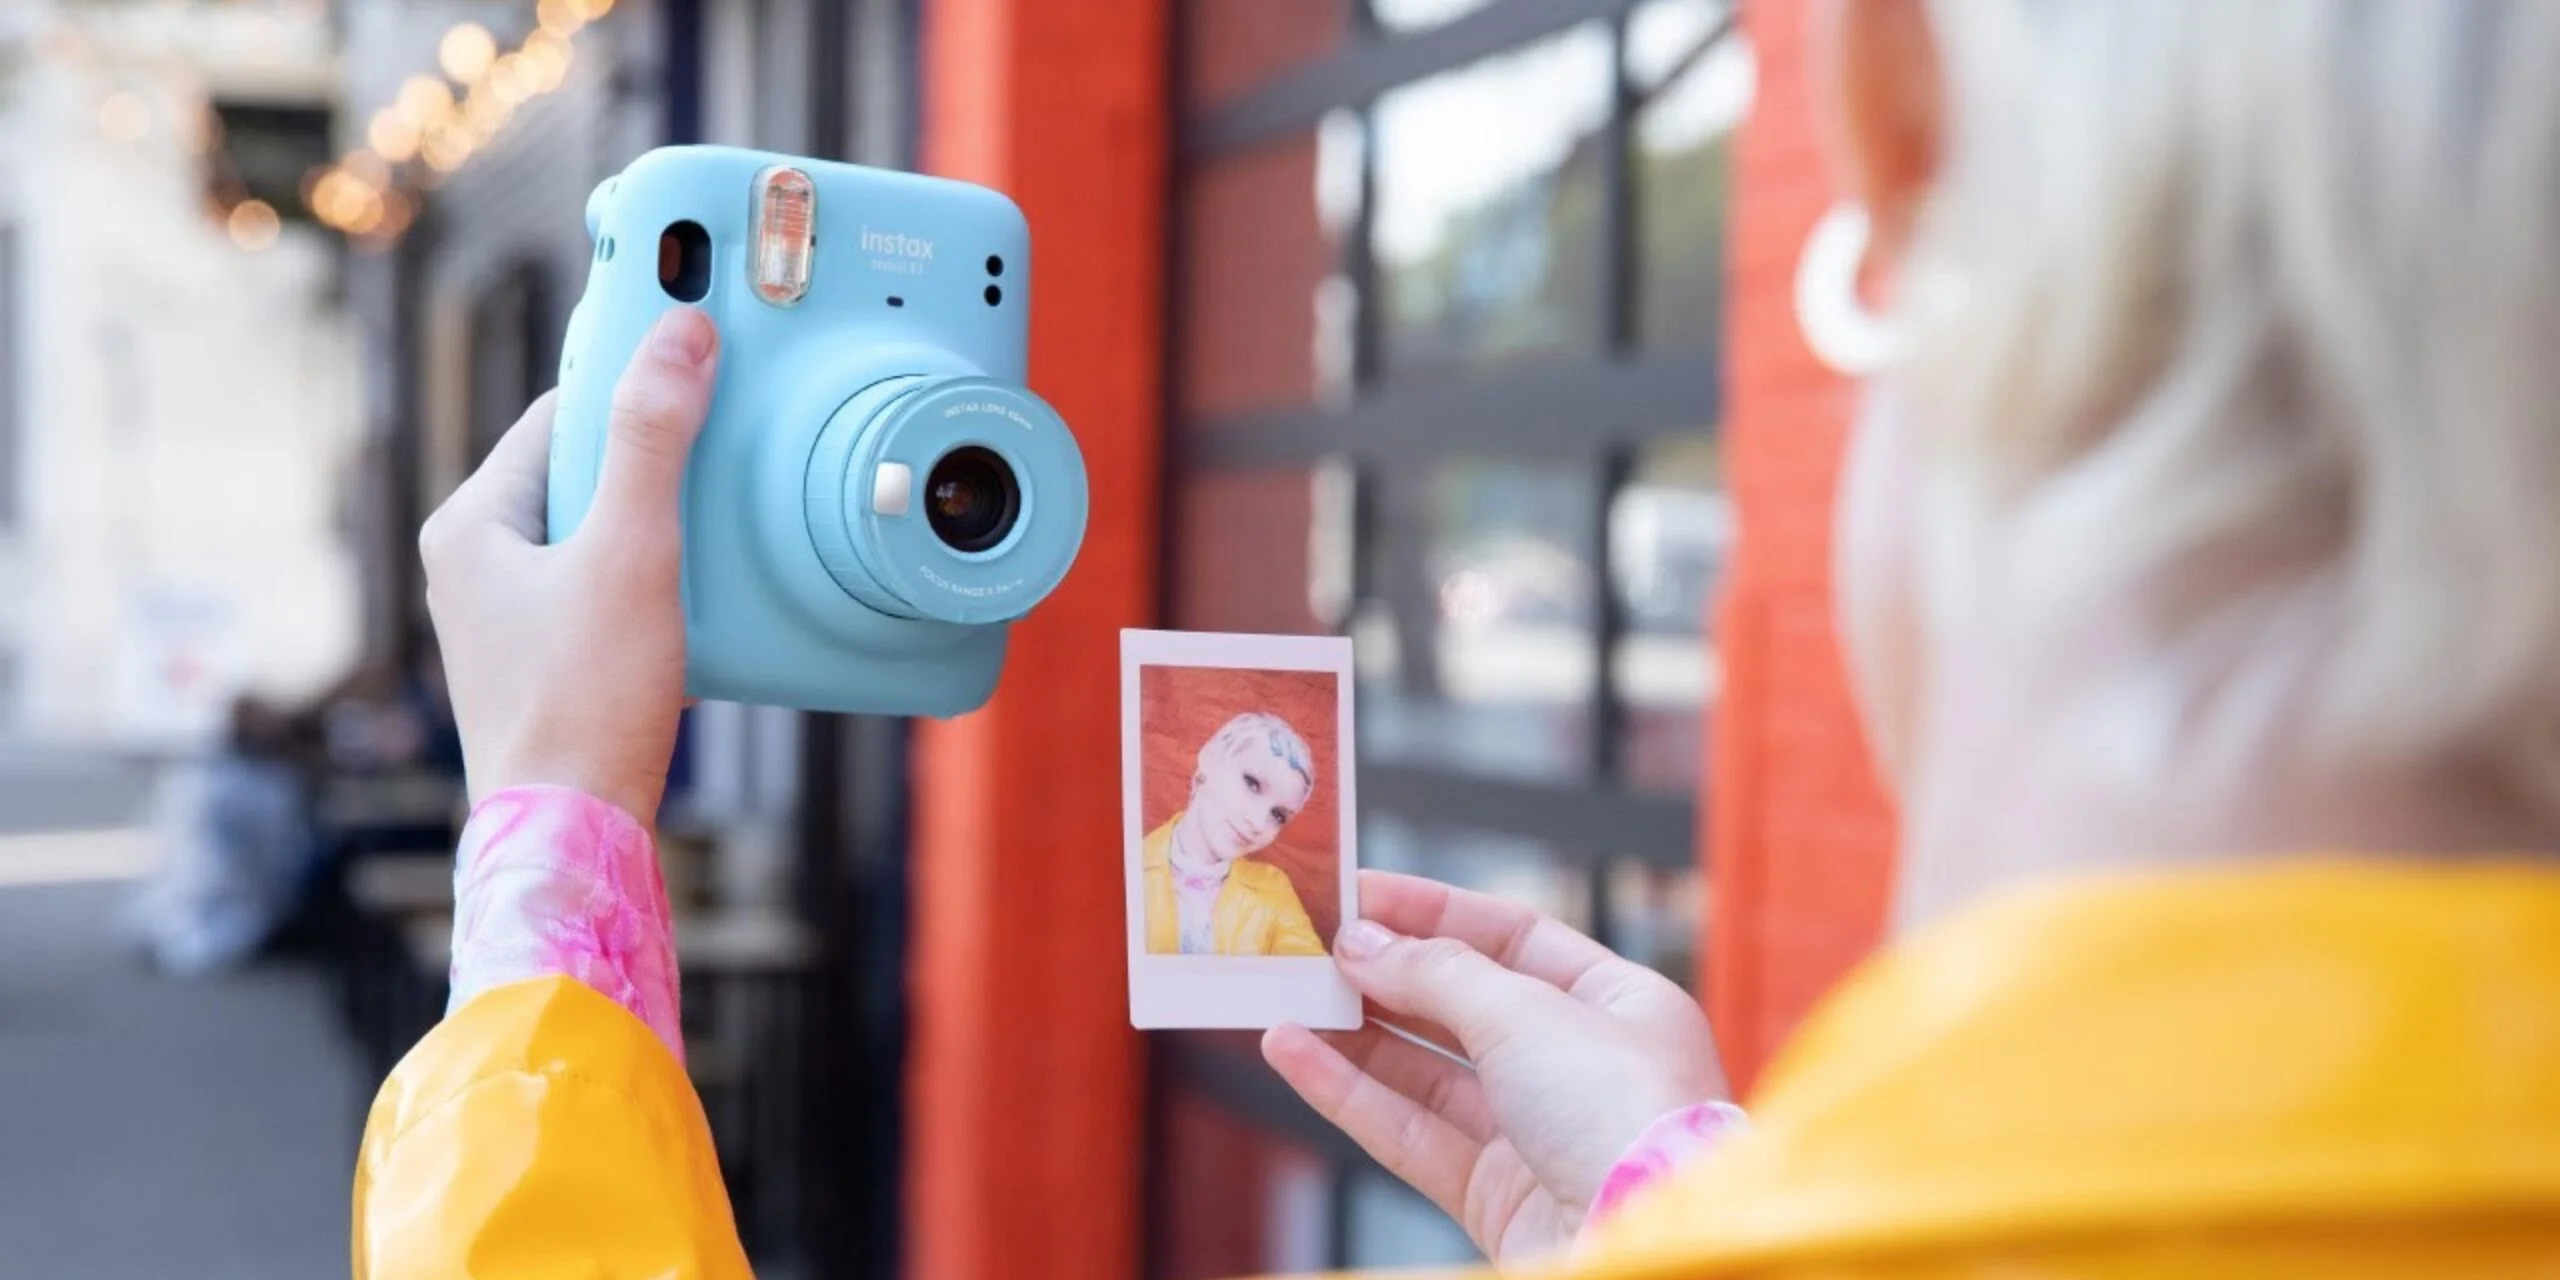 User feedback drives continuous improvement in Instax products